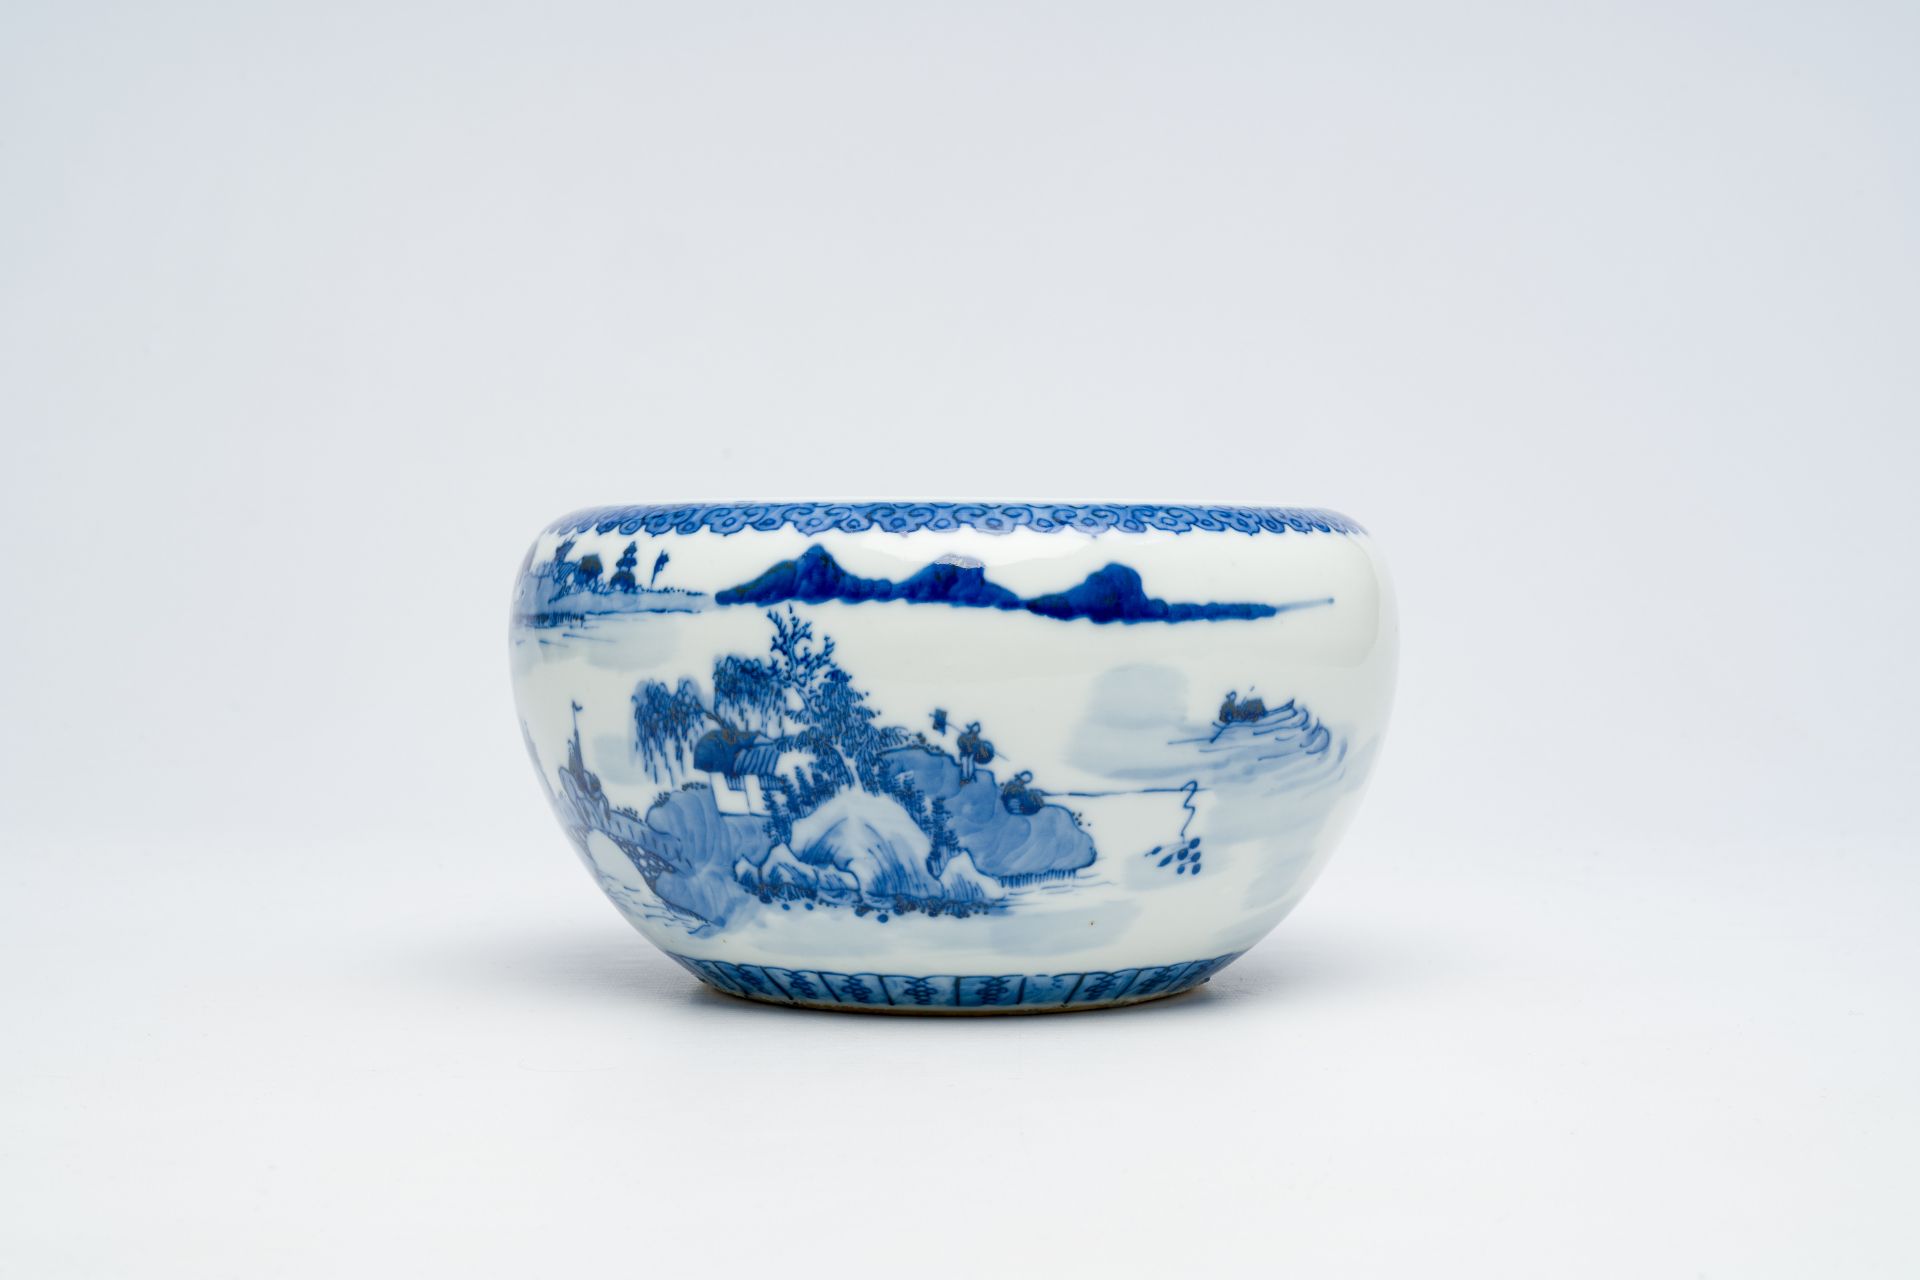 A varied collection of Chinese blue and white porcelain, 19th/20th C. - Image 21 of 30